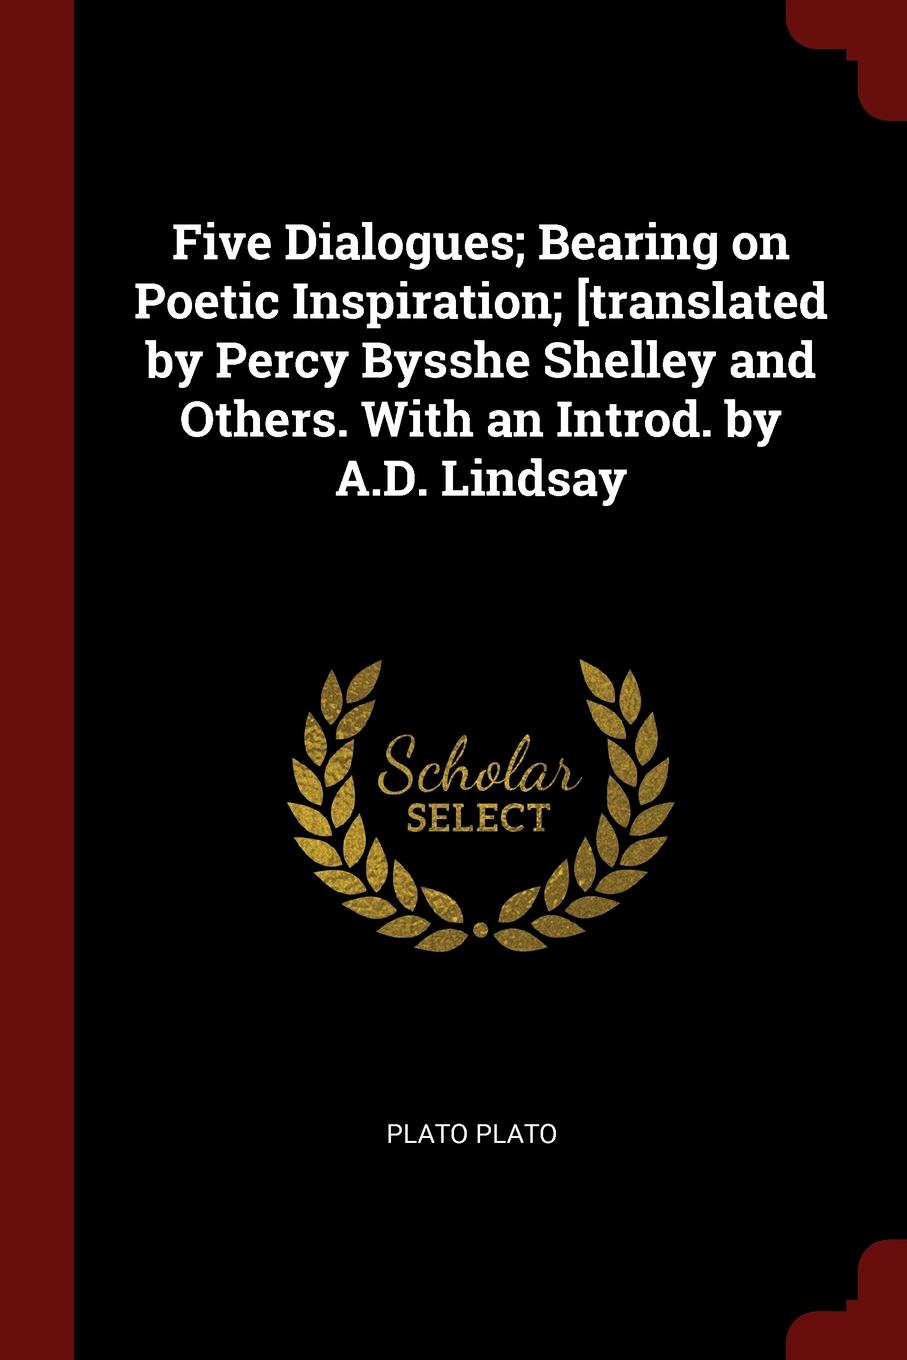 Five Dialogues; Bearing on Poetic Inspiration; .translated by Percy Bysshe Shelley and Others. With an Introd. by A.D. Lindsay